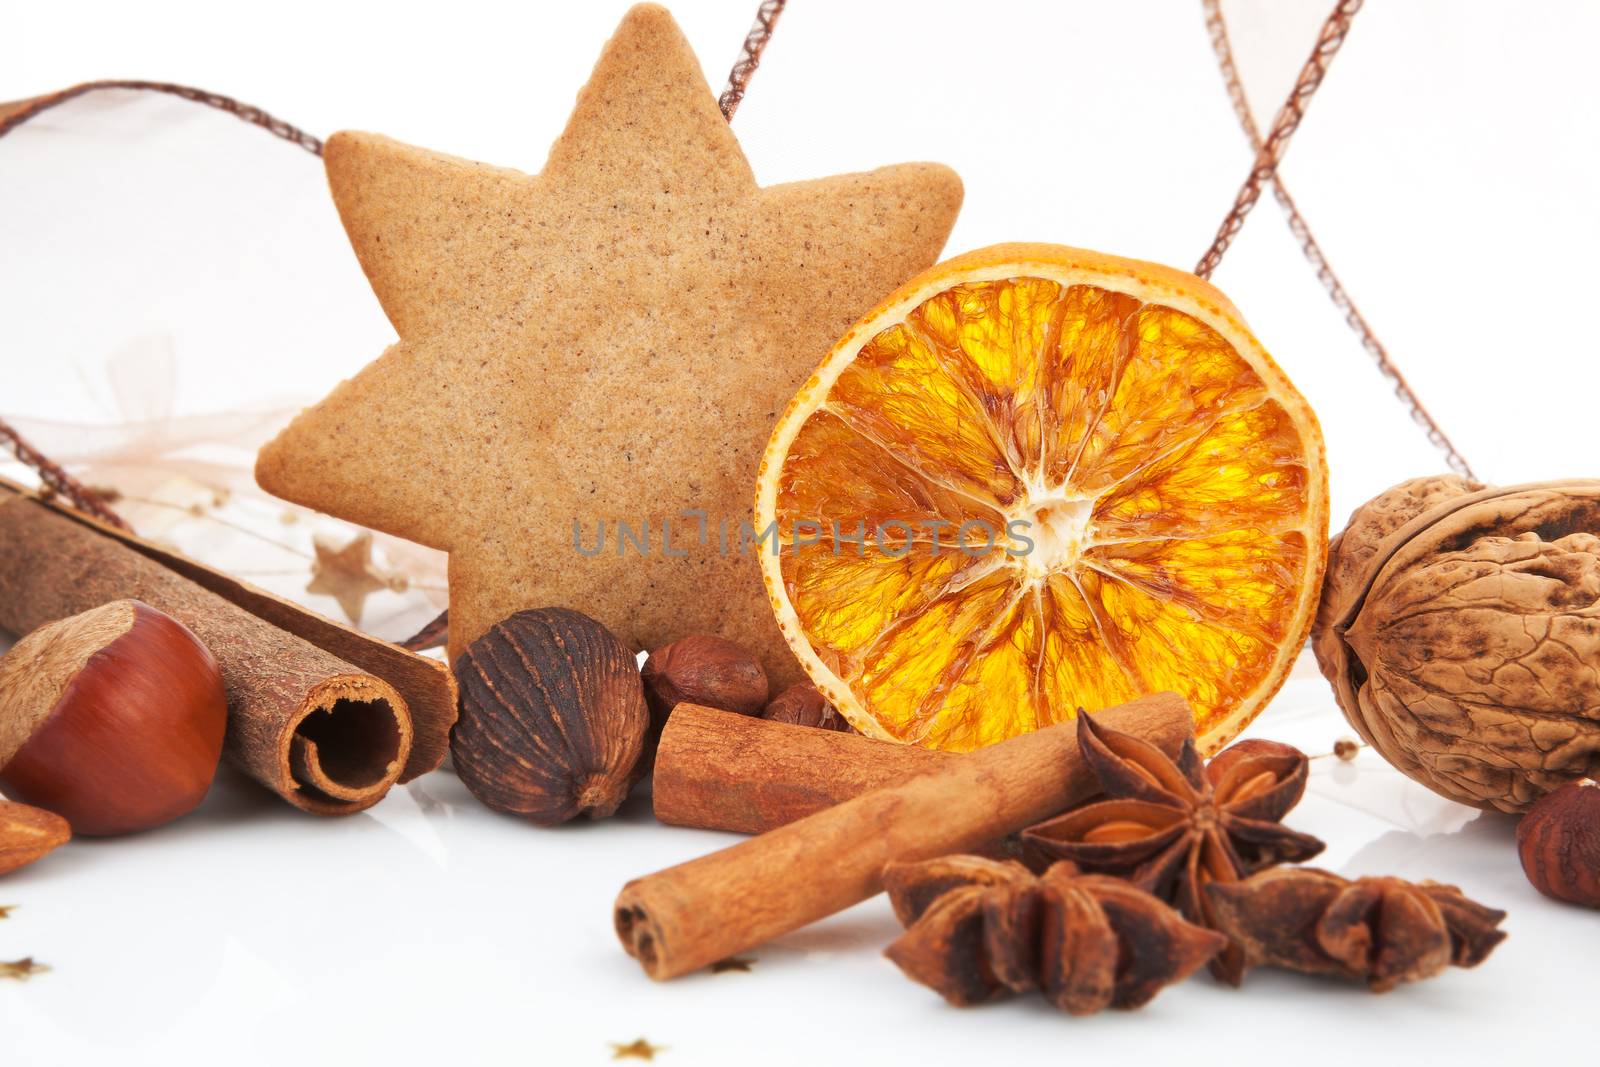 Traditional christmas. Gingerbread, orange, cinnamon and various by eskymaks